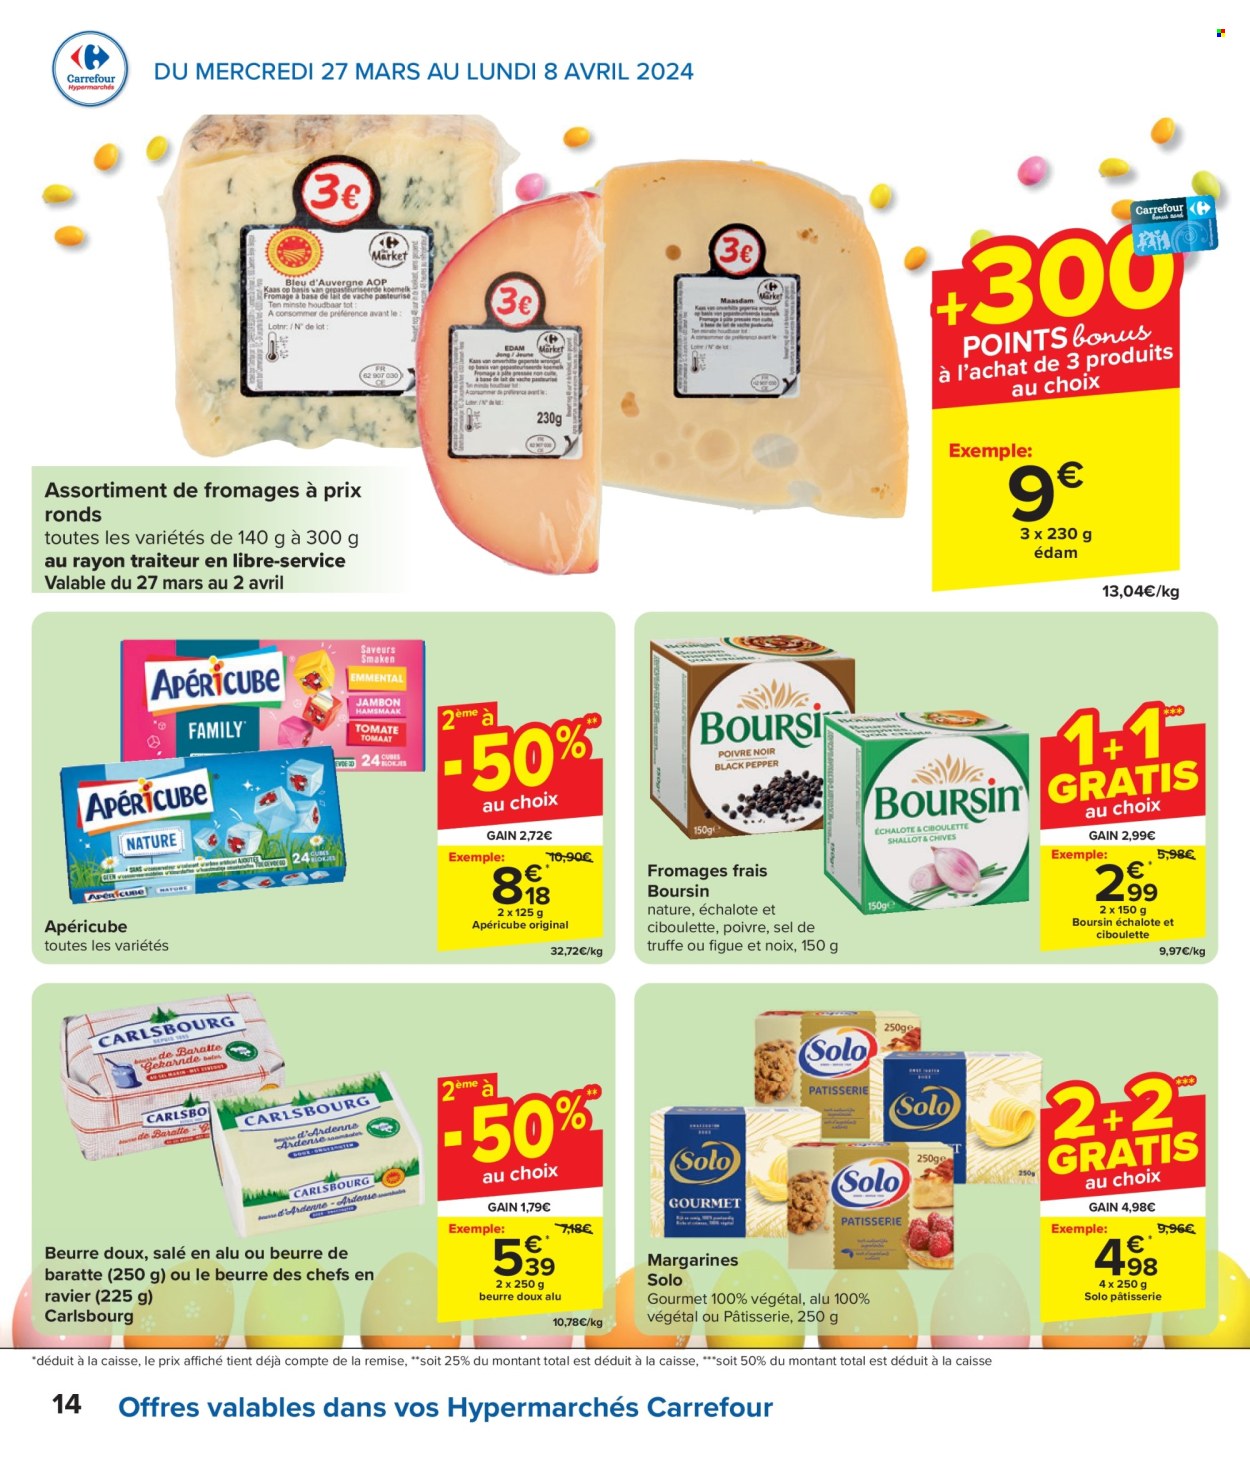 Catalogue Carrefour hypermarkt - 27.3.2024 - 8.4.2024. Page 14.